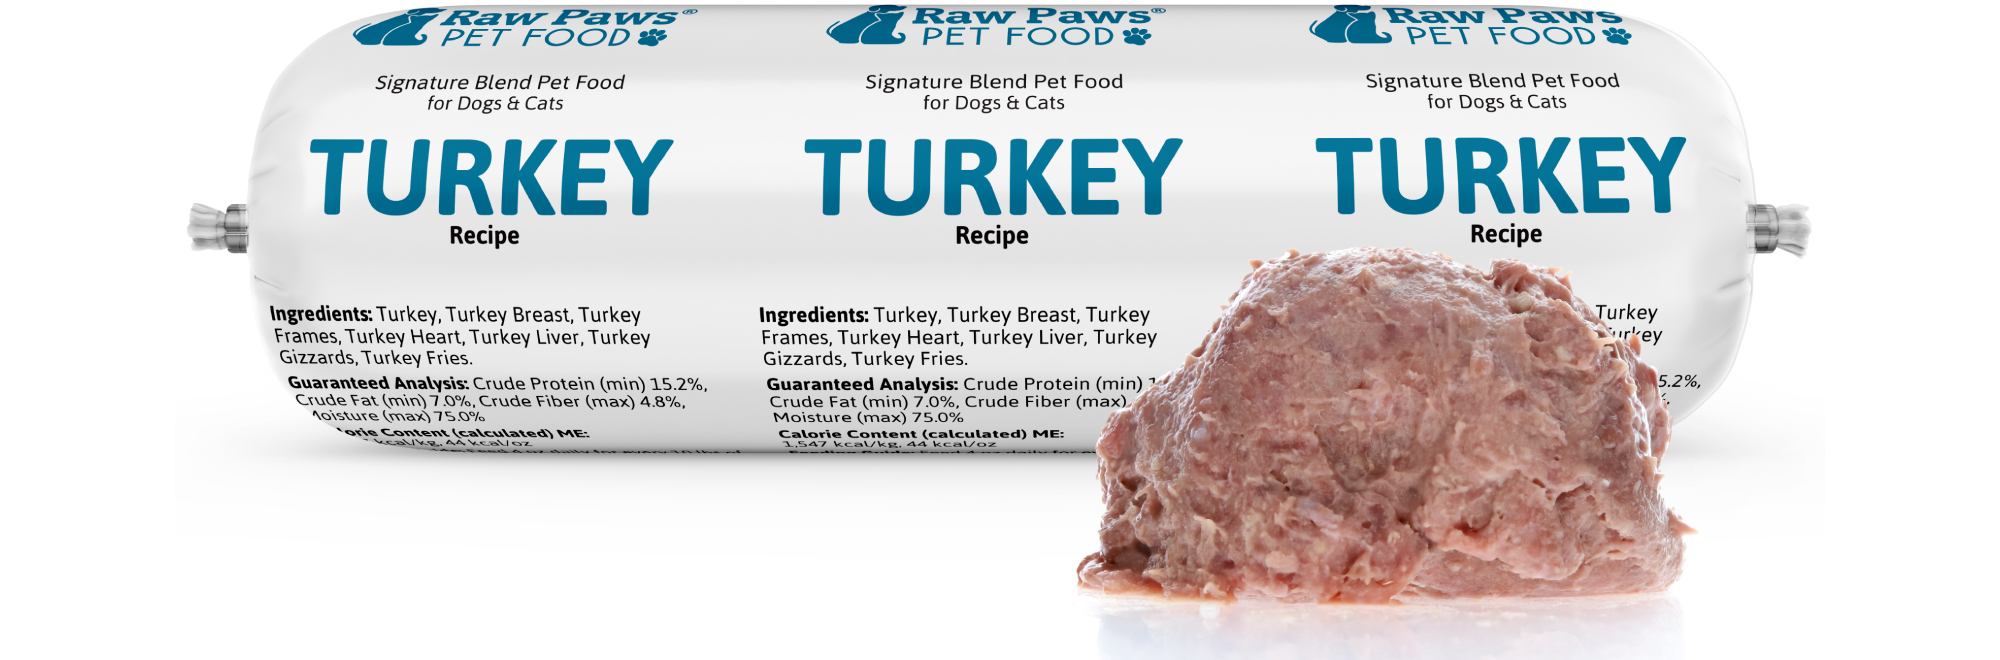 Raw Paws Signature Blend Complete Turkey for Dogs & Cats, 3 lbs